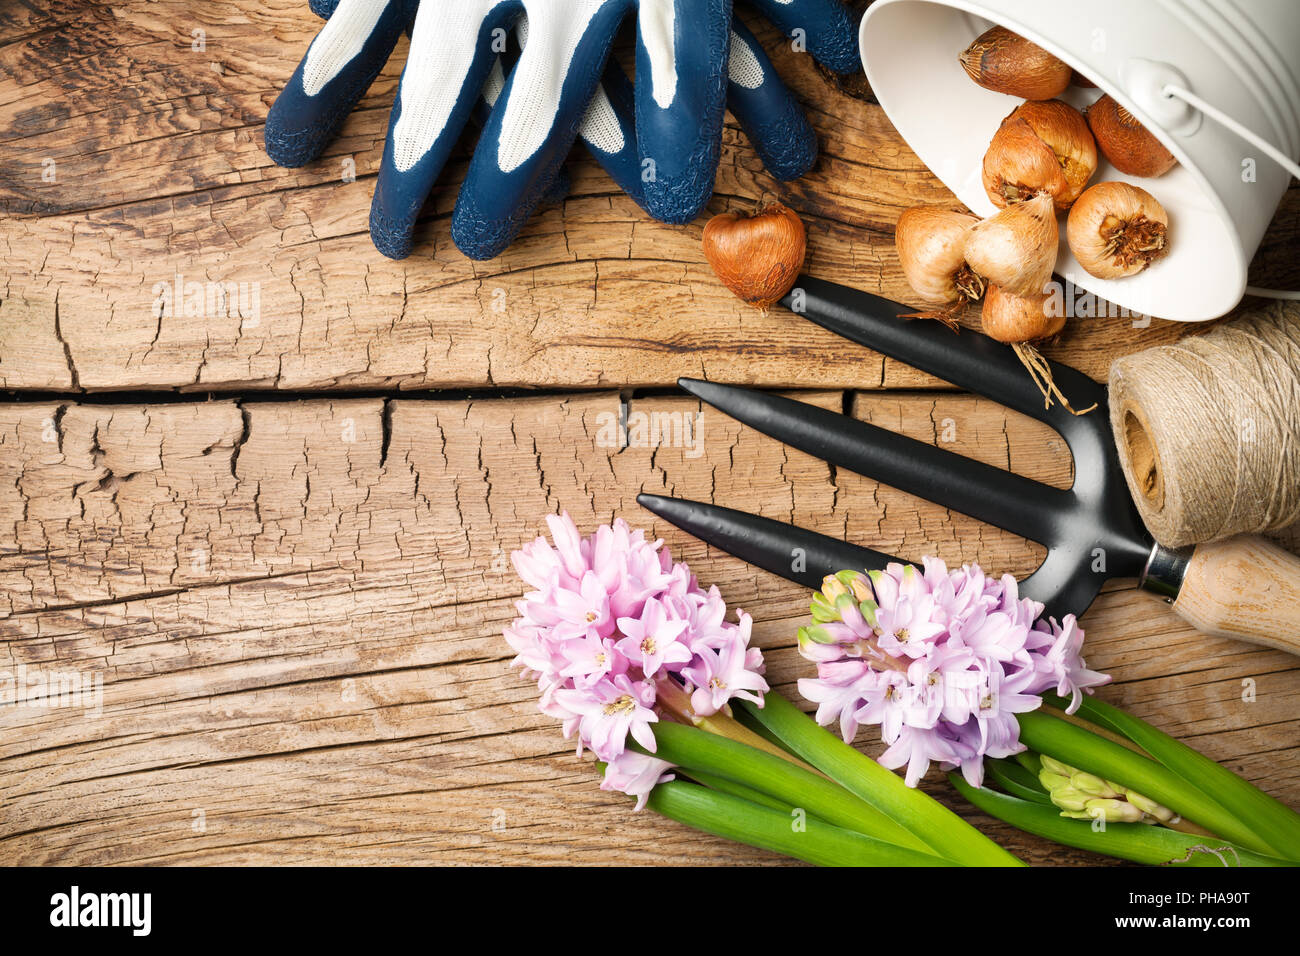 Gardening Tools with Flowers on Wood Background Stock Photo